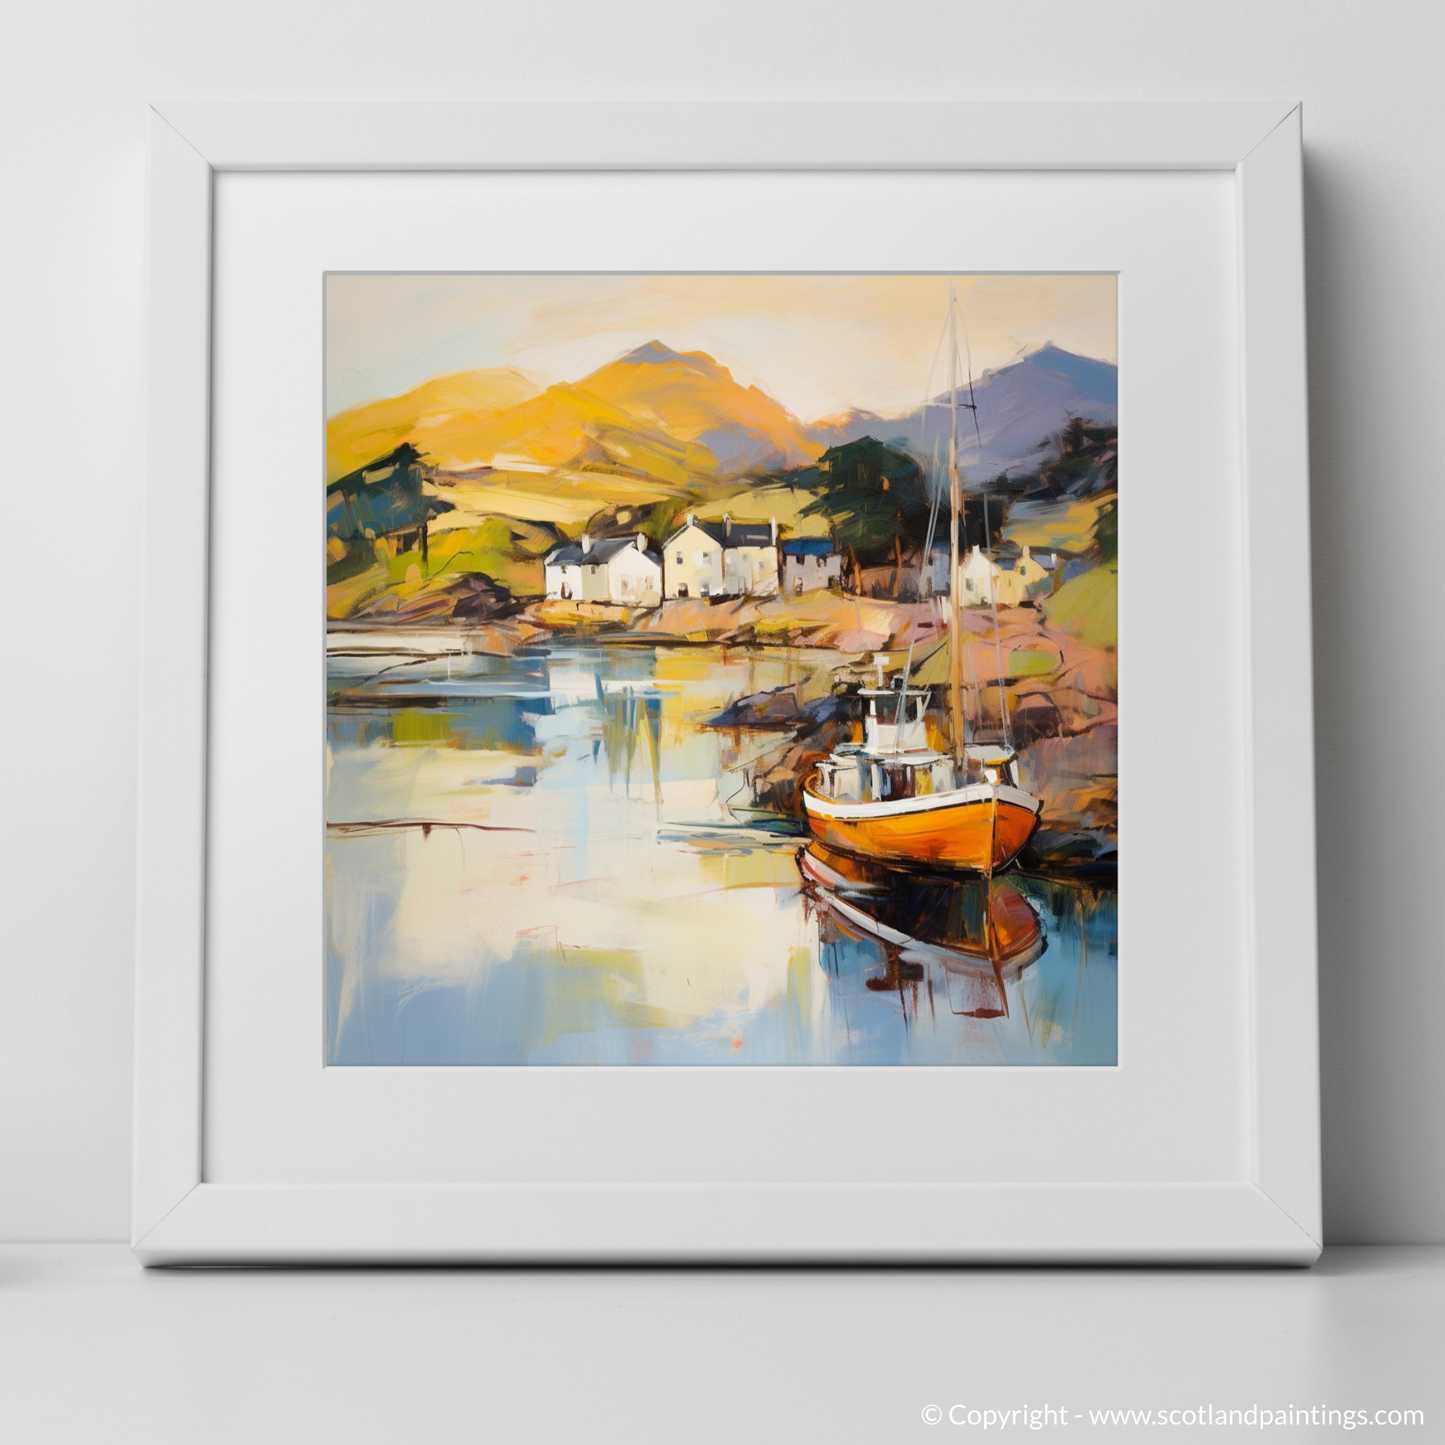 Plockton Harbour Enchantment: An Abstract Expressionist Ode to Scottish Serenity